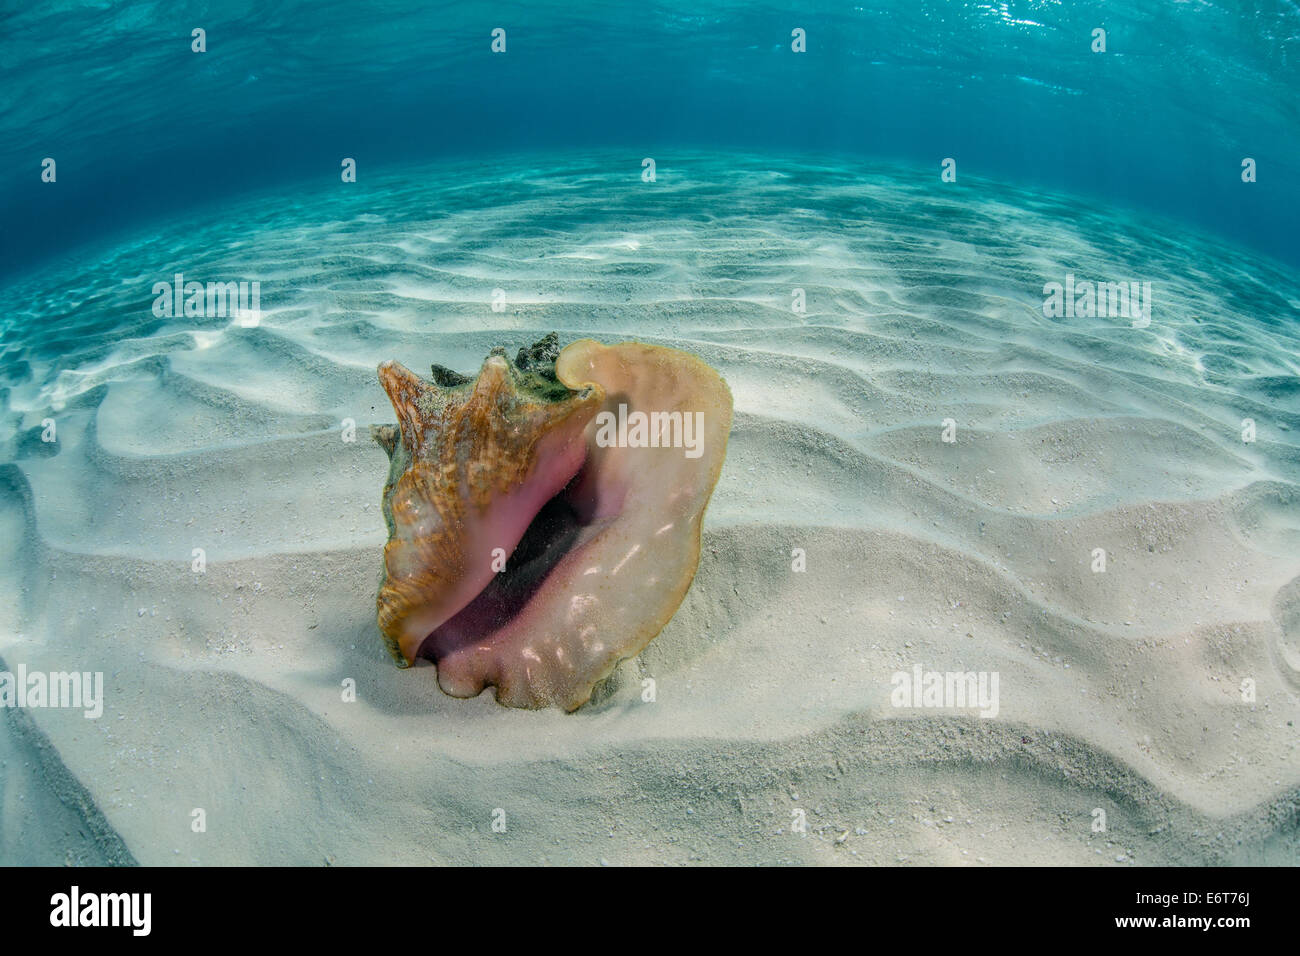 Queen Conch in Lagoon, Strombus gigas, Turneffe Atoll, Caribbean, Belize Stock Photo